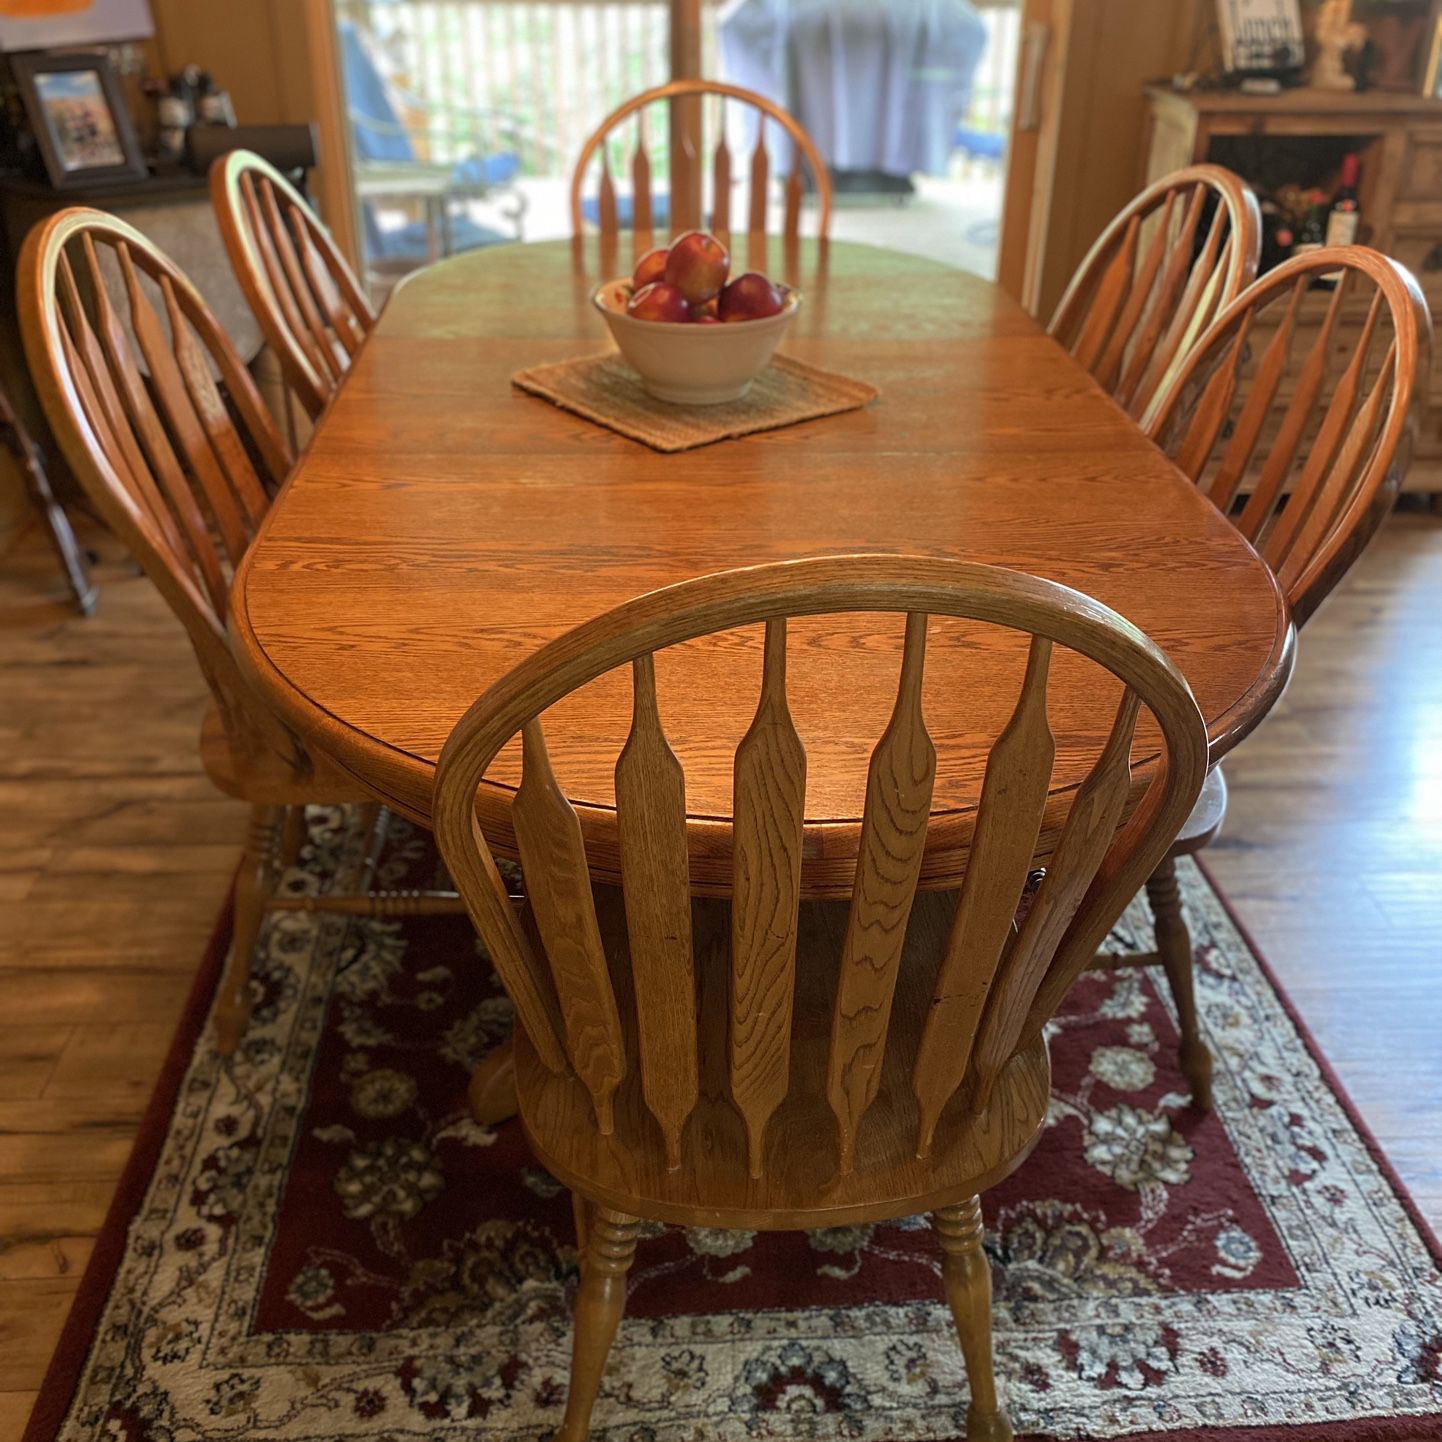 Solid Oak Dining Table Set with 6 Chairs and Leaf - Real Wood - Excellent Condition -